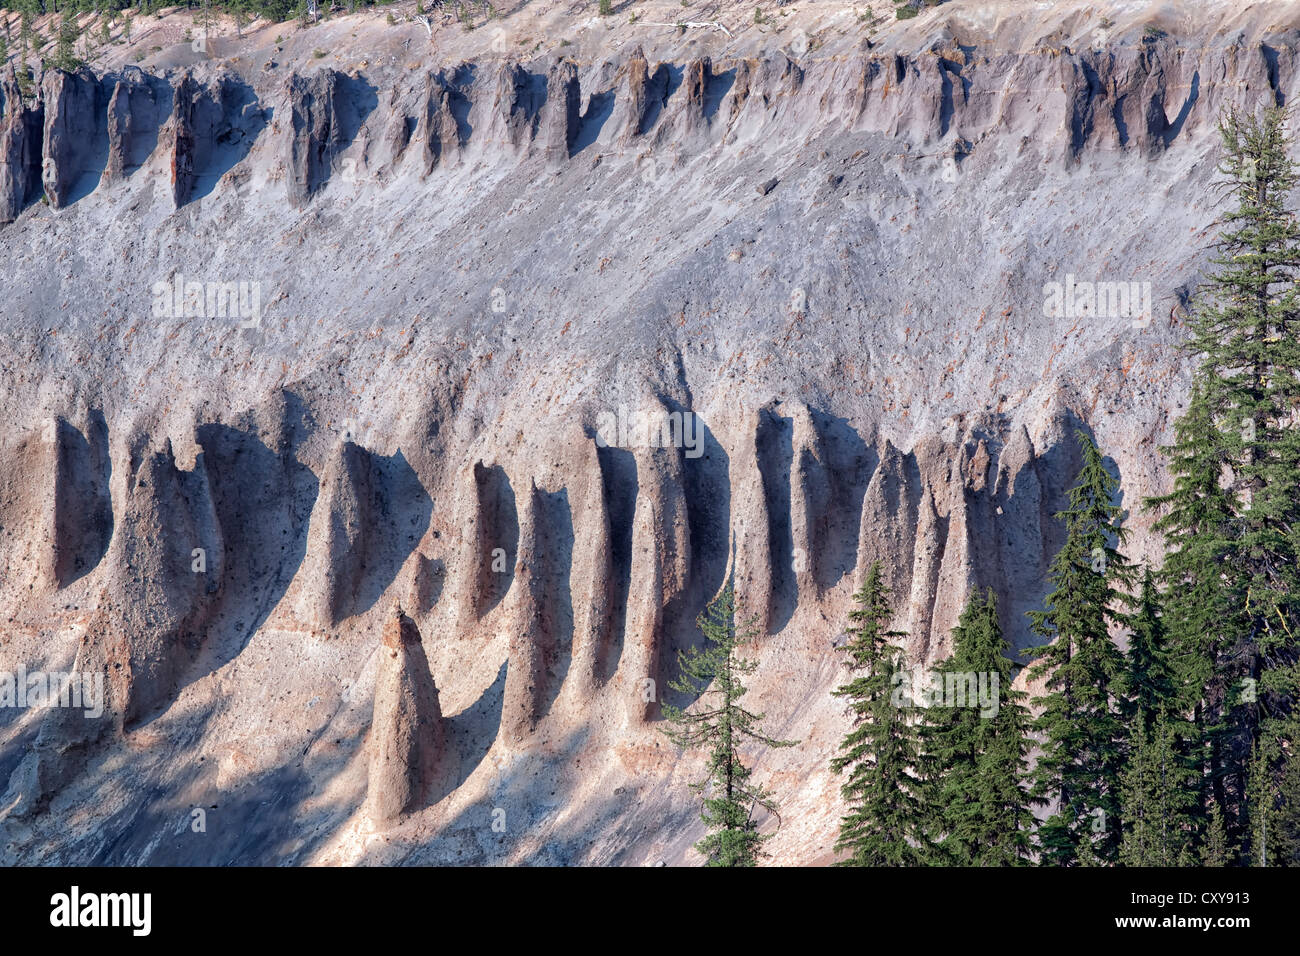 Volcanic formed hoodoos emerge from the walls of Annie Creek Canyon in Oregon’s Crater Lake National Park. Stock Photo